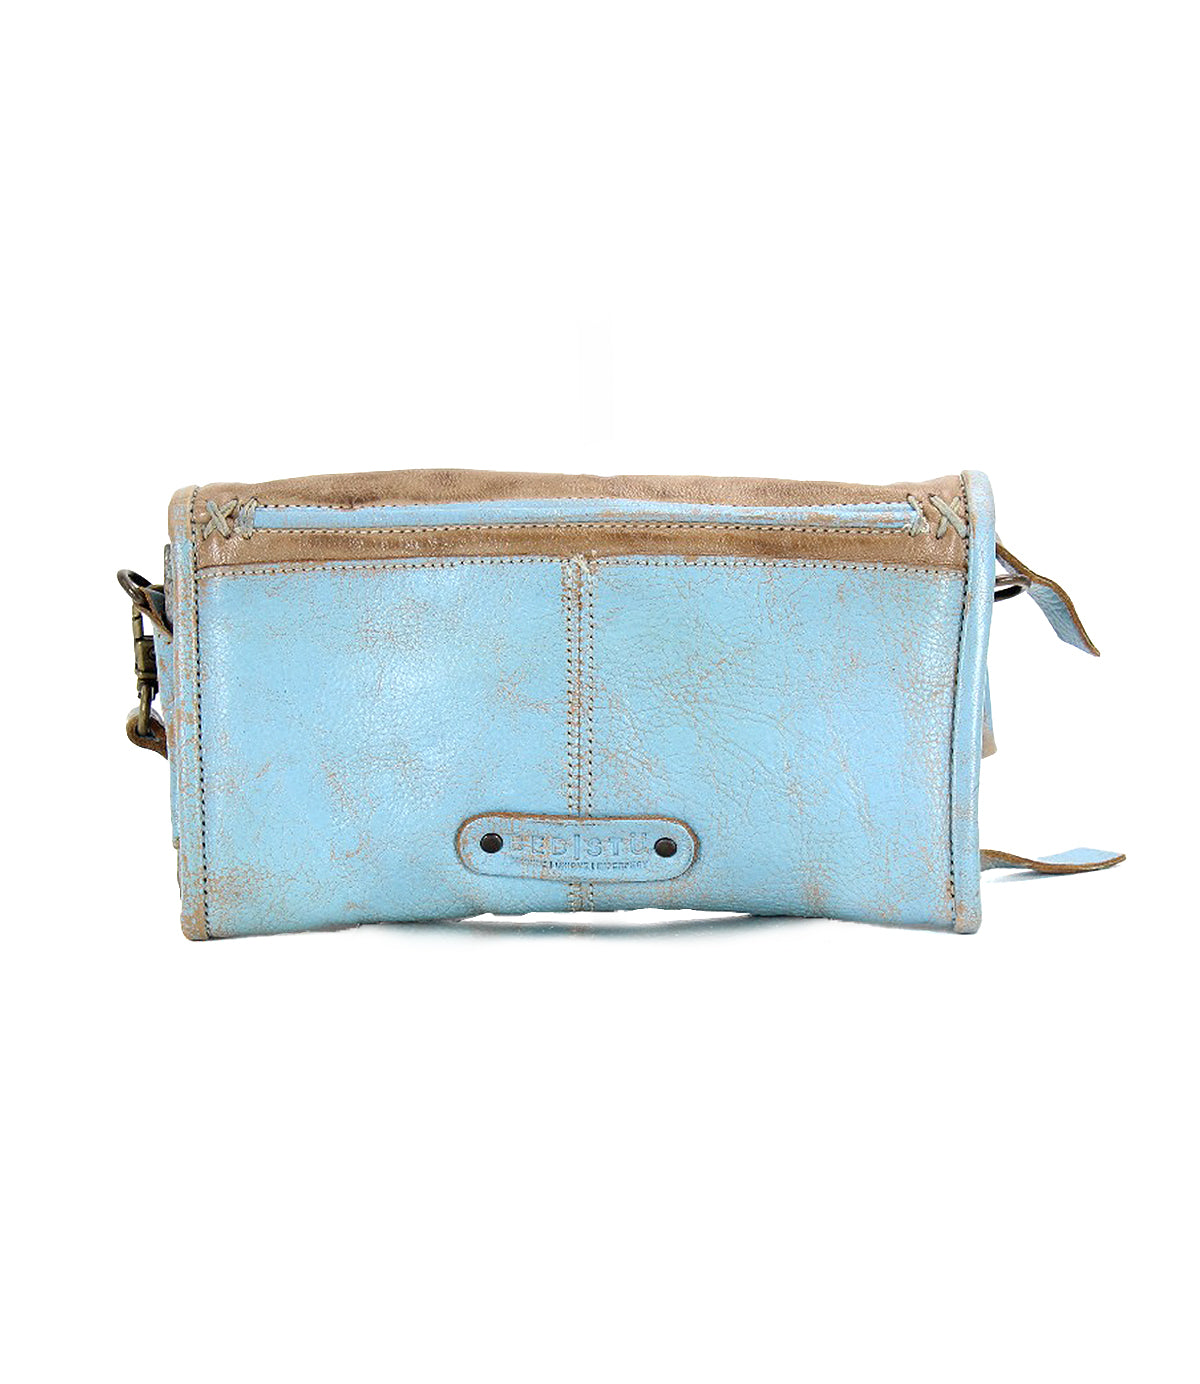 A Bed Stu Amina II light blue leather purse with a zipper that can be worn as a crossbody bag for added versatility.